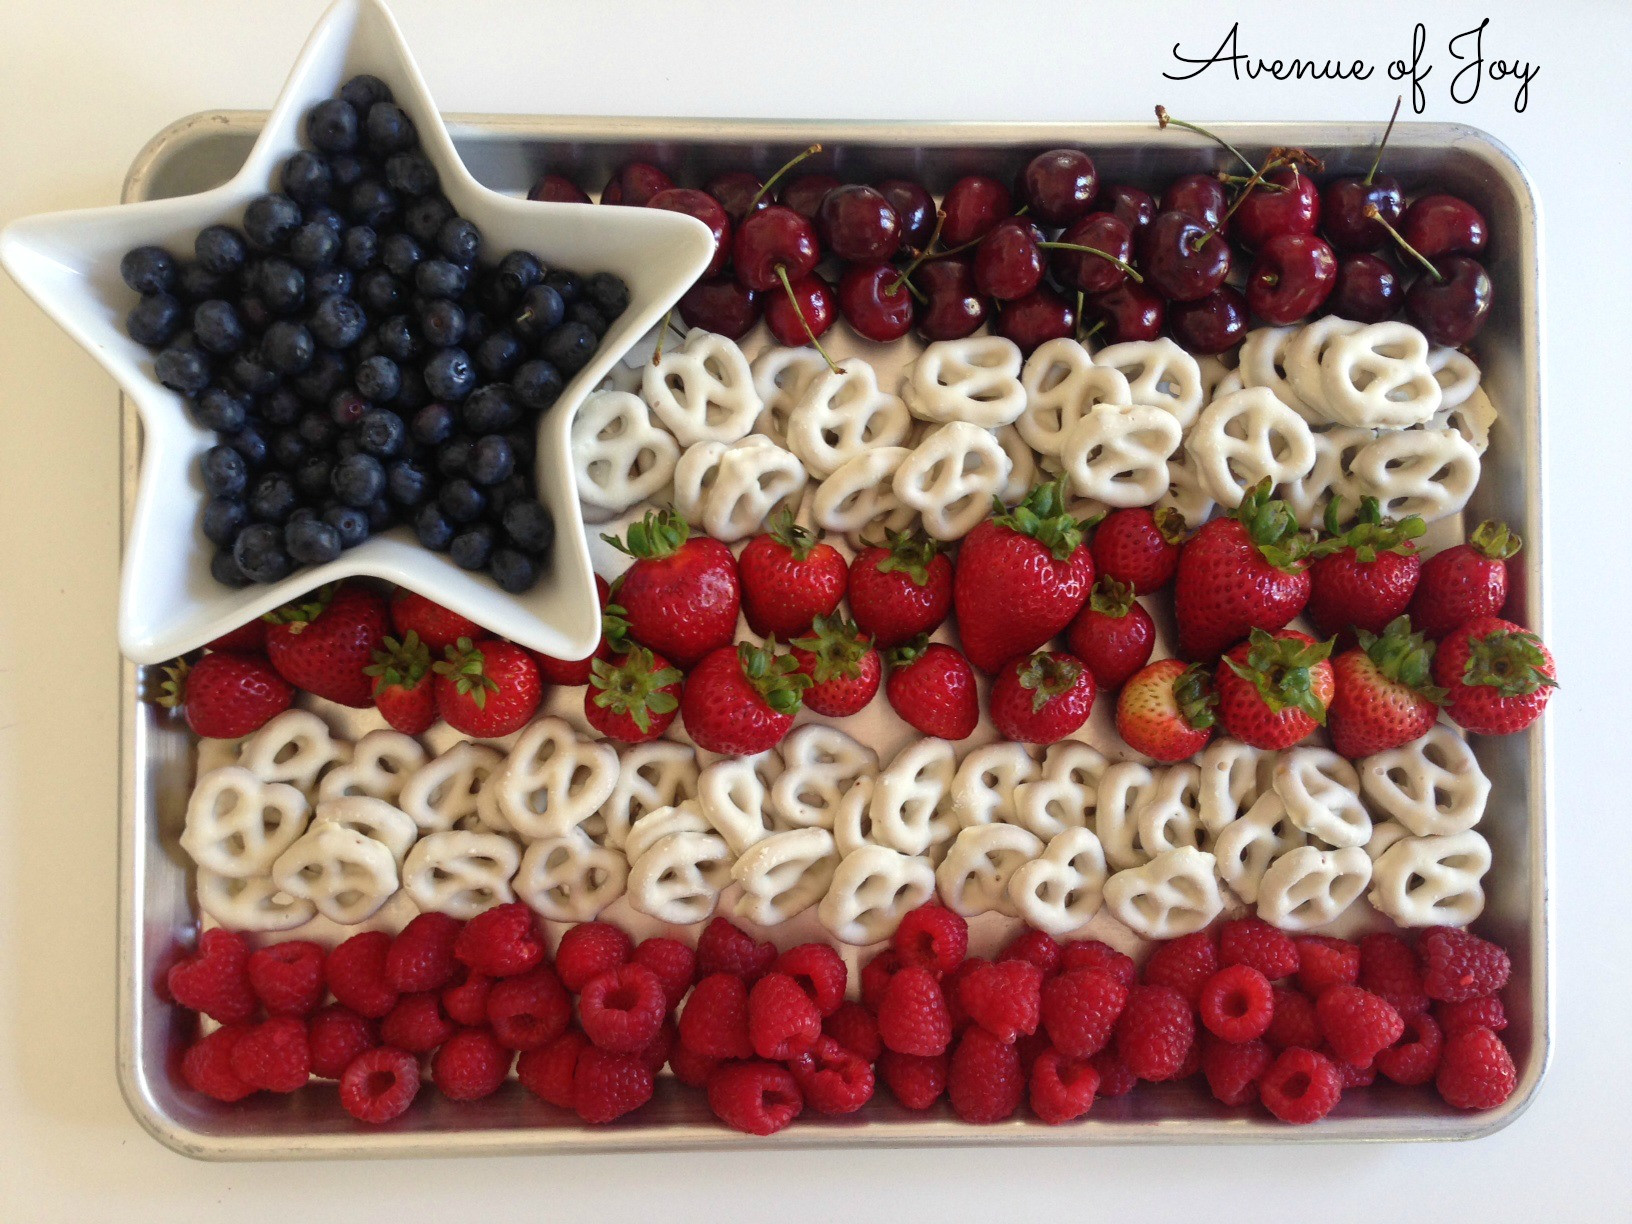 4Th Of July Fruit Desserts
 All American Fruit Flag Dessert Snack and other 4th of